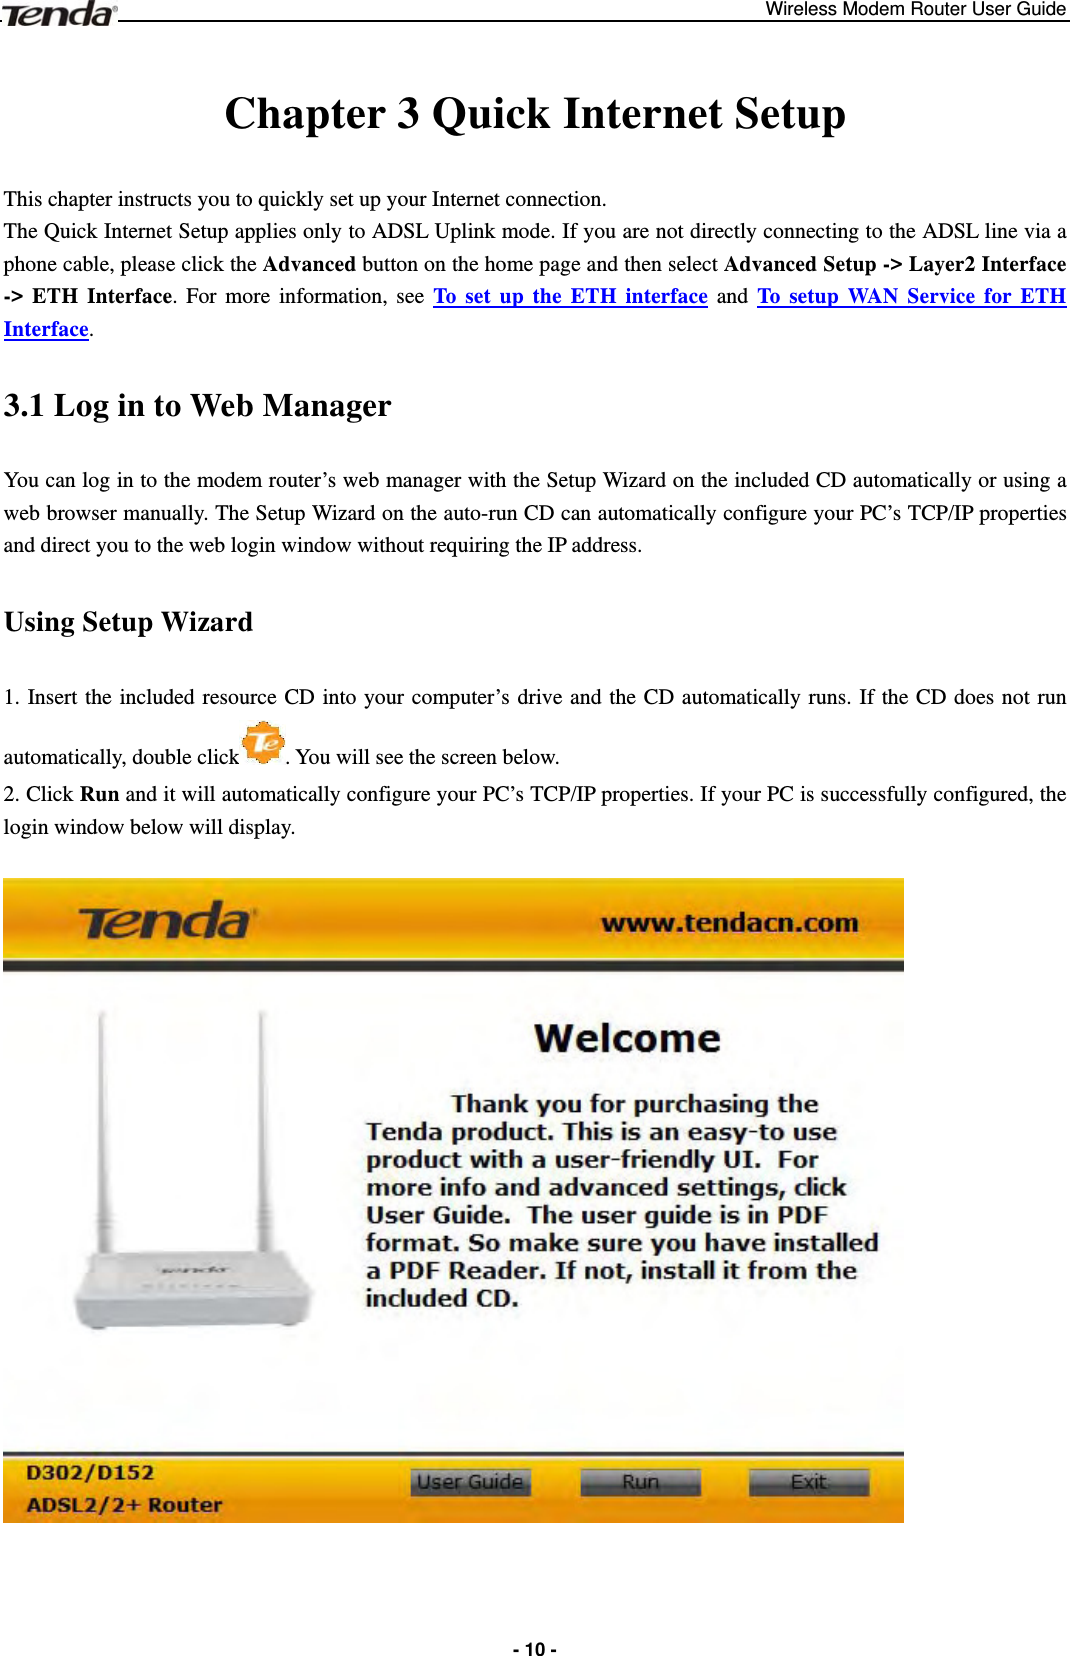 Wireless Modem Router User Guide  - 10 - Chapter 3 Quick Internet Setup This chapter instructs you to quickly set up your Internet connection.  The Quick Internet Setup applies only to ADSL Uplink mode. If you are not directly connecting to the ADSL line via a phone cable, please click the Advanced button on the home page and then select Advanced Setup -&gt; Layer2 Interface -&gt; ETH Interface. For more information, see To set up the ETH interface and To setup WAN Service for ETH Interface. 3.1 Log in to Web Manager You can log in to the modem router’s web manager with the Setup Wizard on the included CD automatically or using a web browser manually. The Setup Wizard on the auto-run CD can automatically configure your PC’s TCP/IP properties and direct you to the web login window without requiring the IP address. Using Setup Wizard 1. Insert the included resource CD into your computer’s drive and the CD automatically runs. If the CD does not run automatically, double click . You will see the screen below.     2. Click Run and it will automatically configure your PC’s TCP/IP properties. If your PC is successfully configured, the login window below will display.   